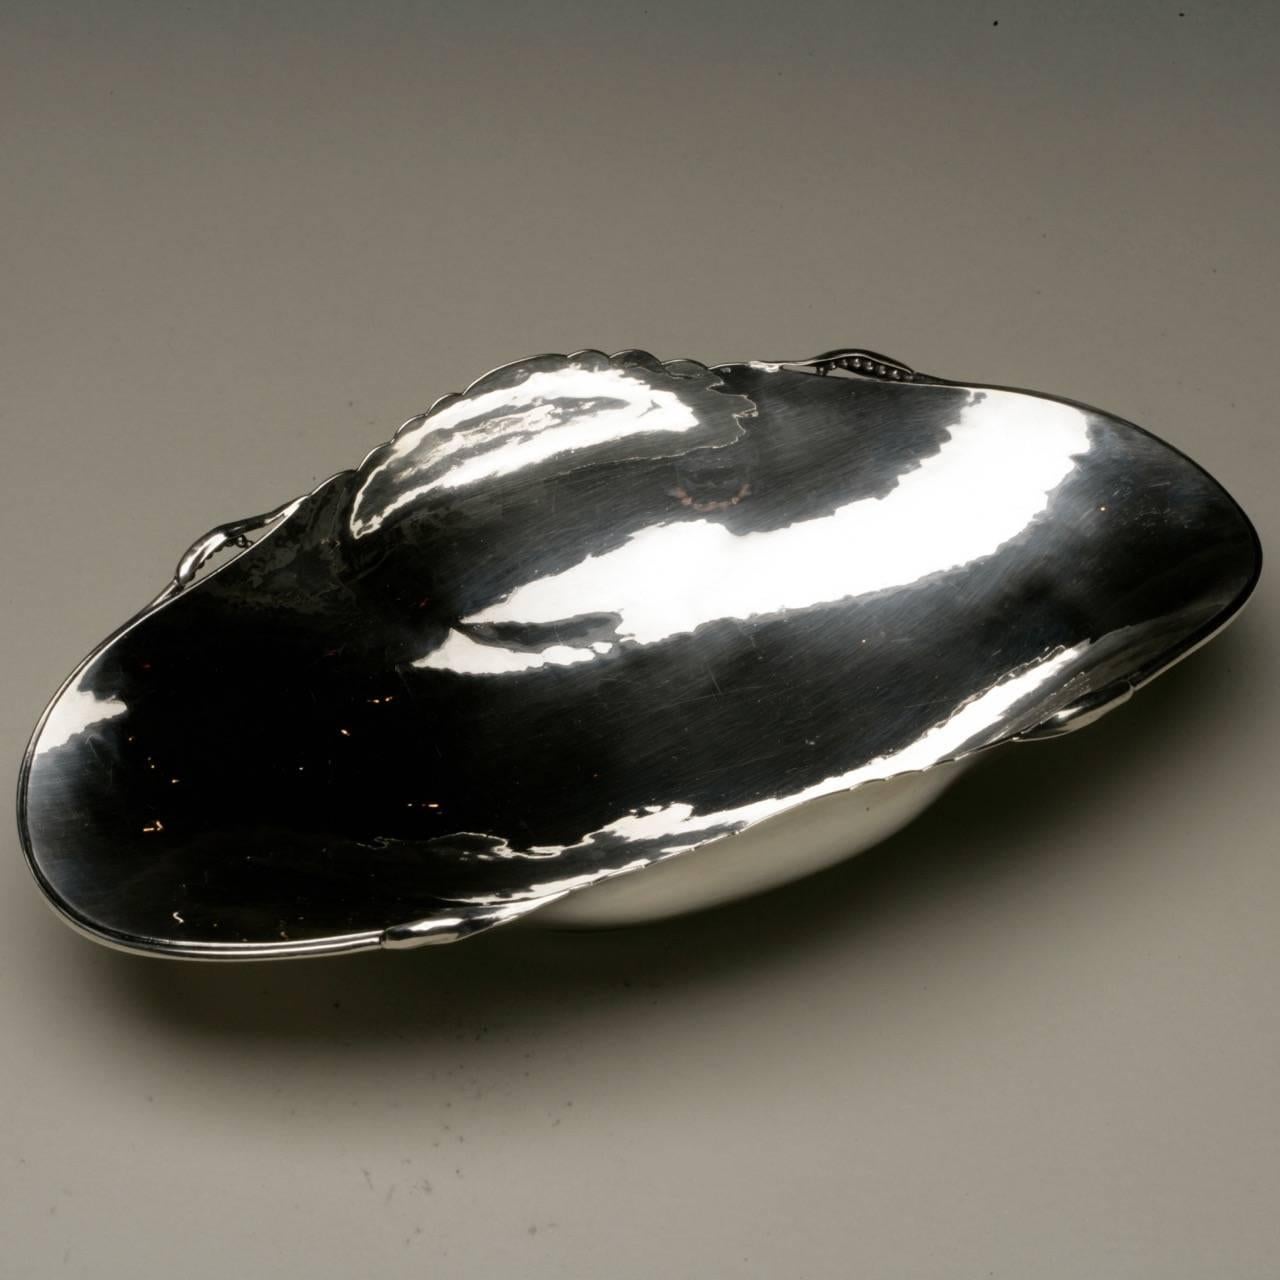 Peer Smed sterling silver dish.

Beautiful hand-wrought hand-raised sterling silver footed dish in a gondola shape with berry details. Perfect for serving peas or tea biscuits. 

Peer Smed's works are very rare to find and entirely made by his